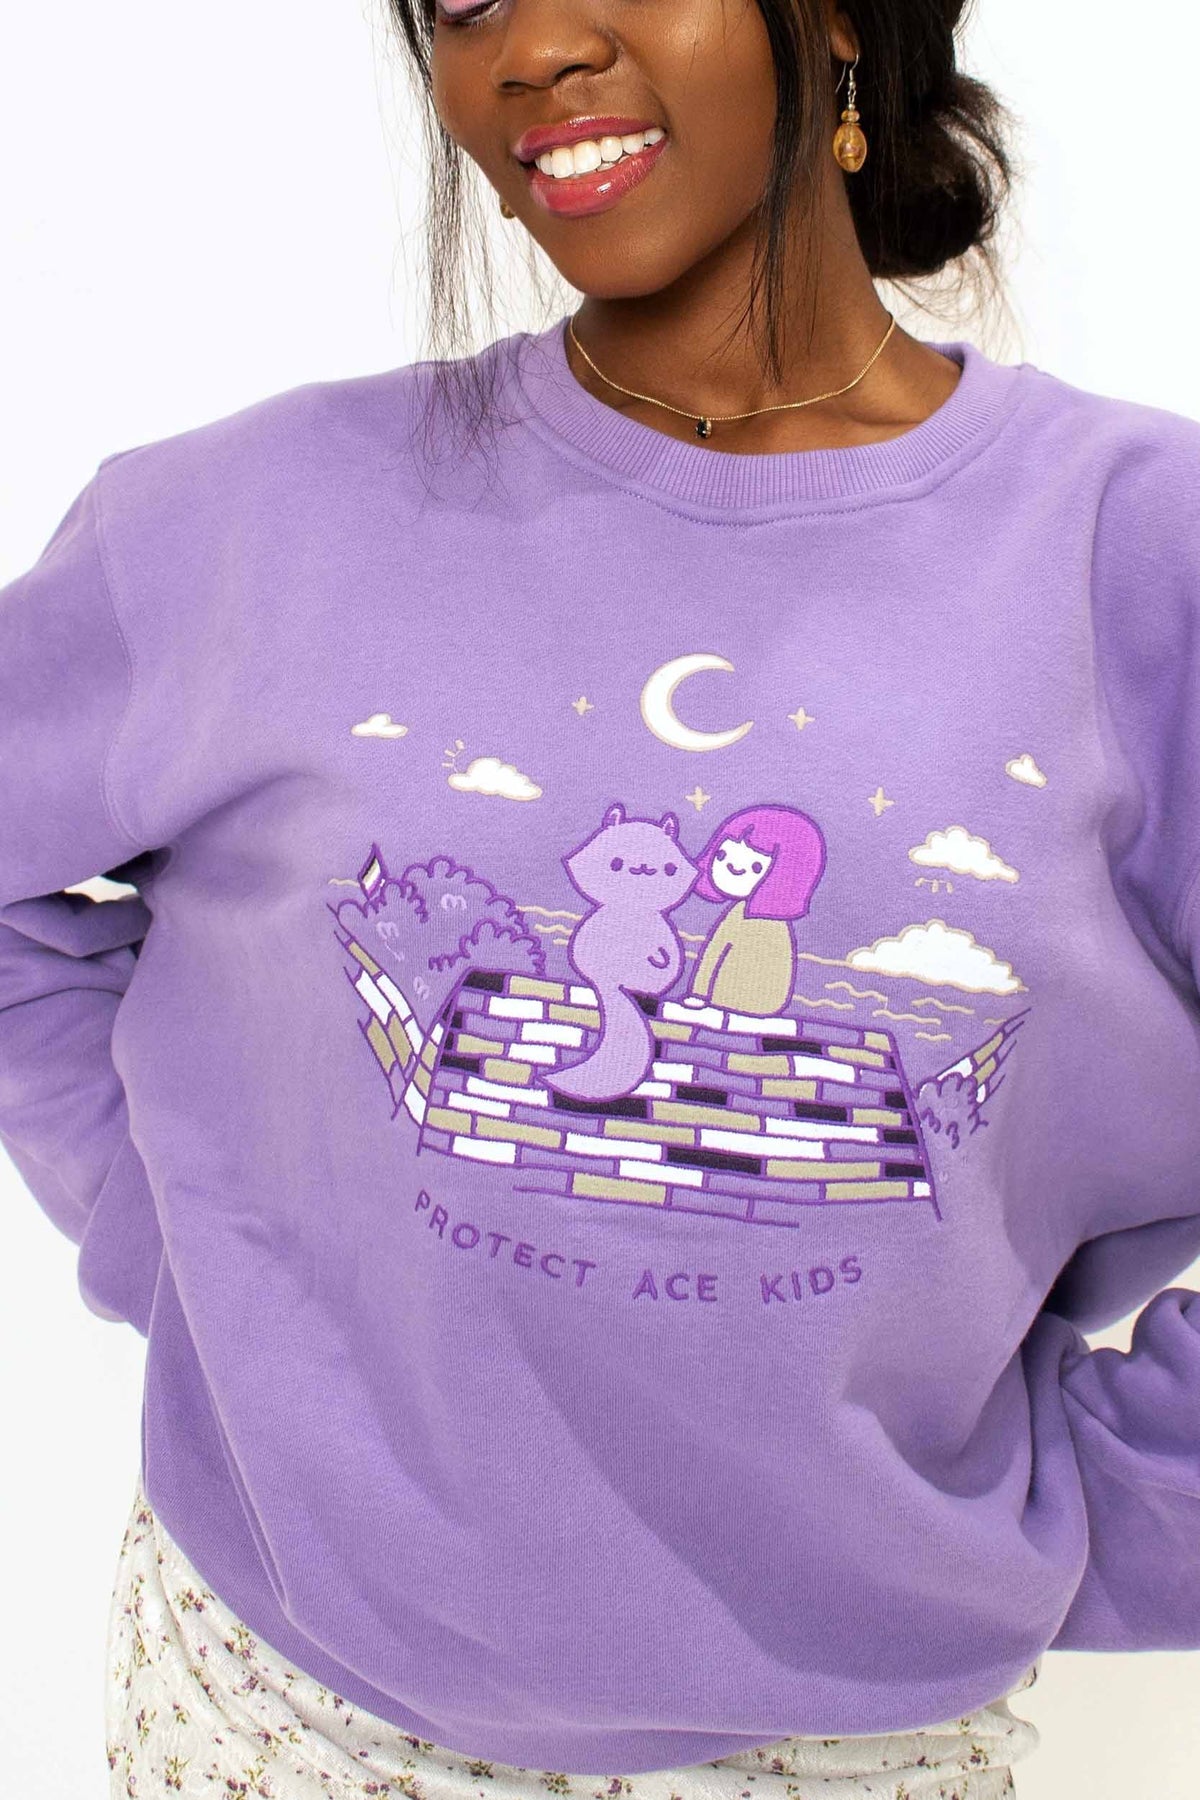 Protect Asexual Kids Sweater (LIMITED Pride Paws Of – EDITION)